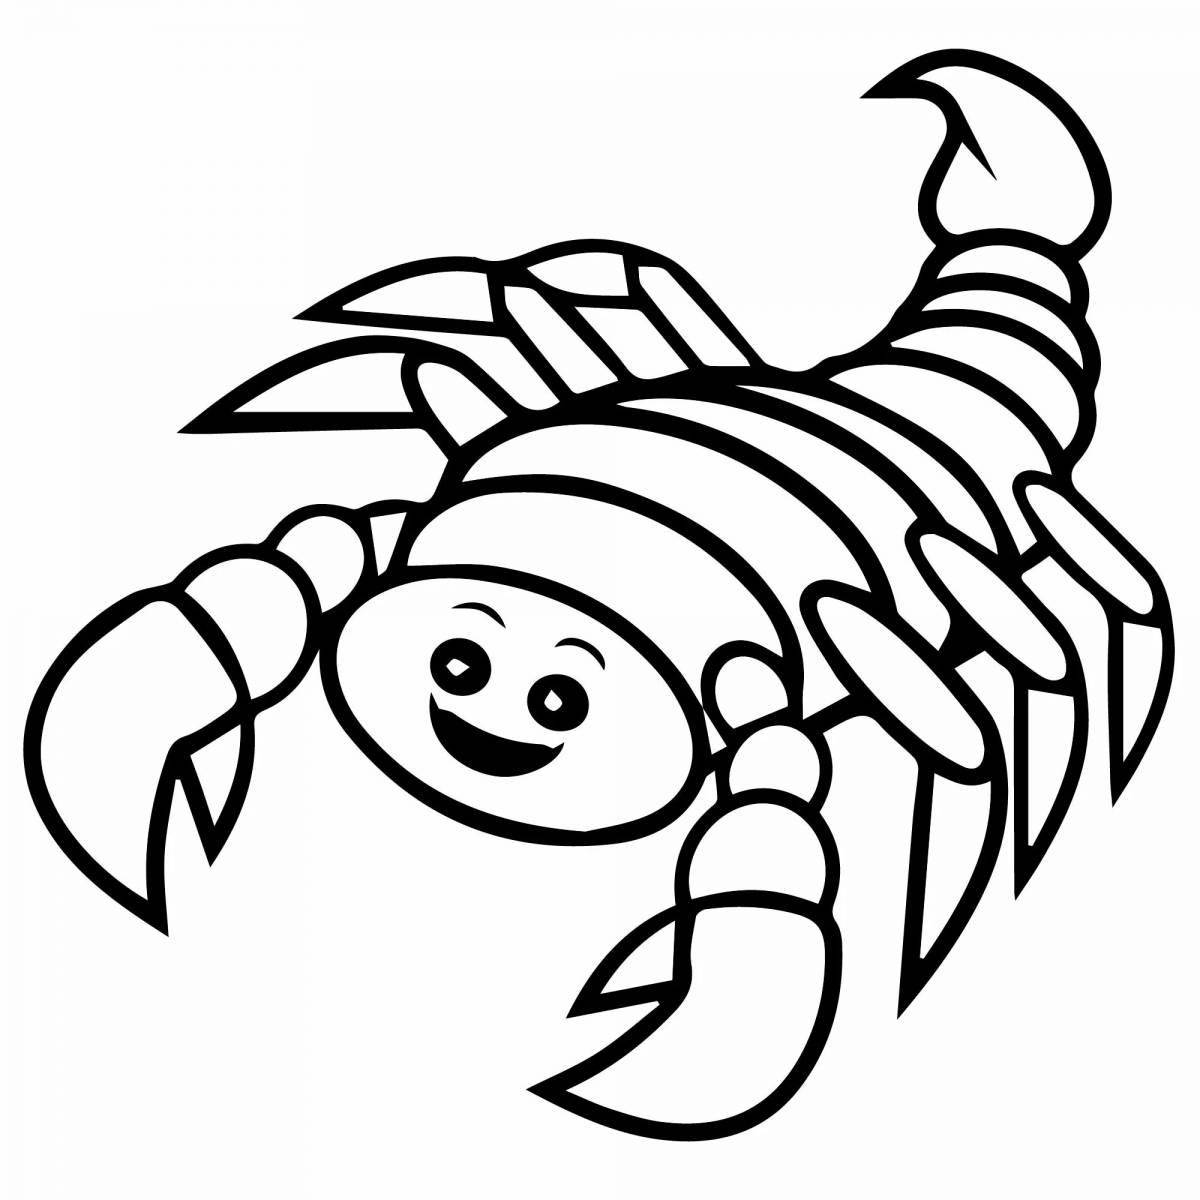 Colorful scorpion coloring page for kids